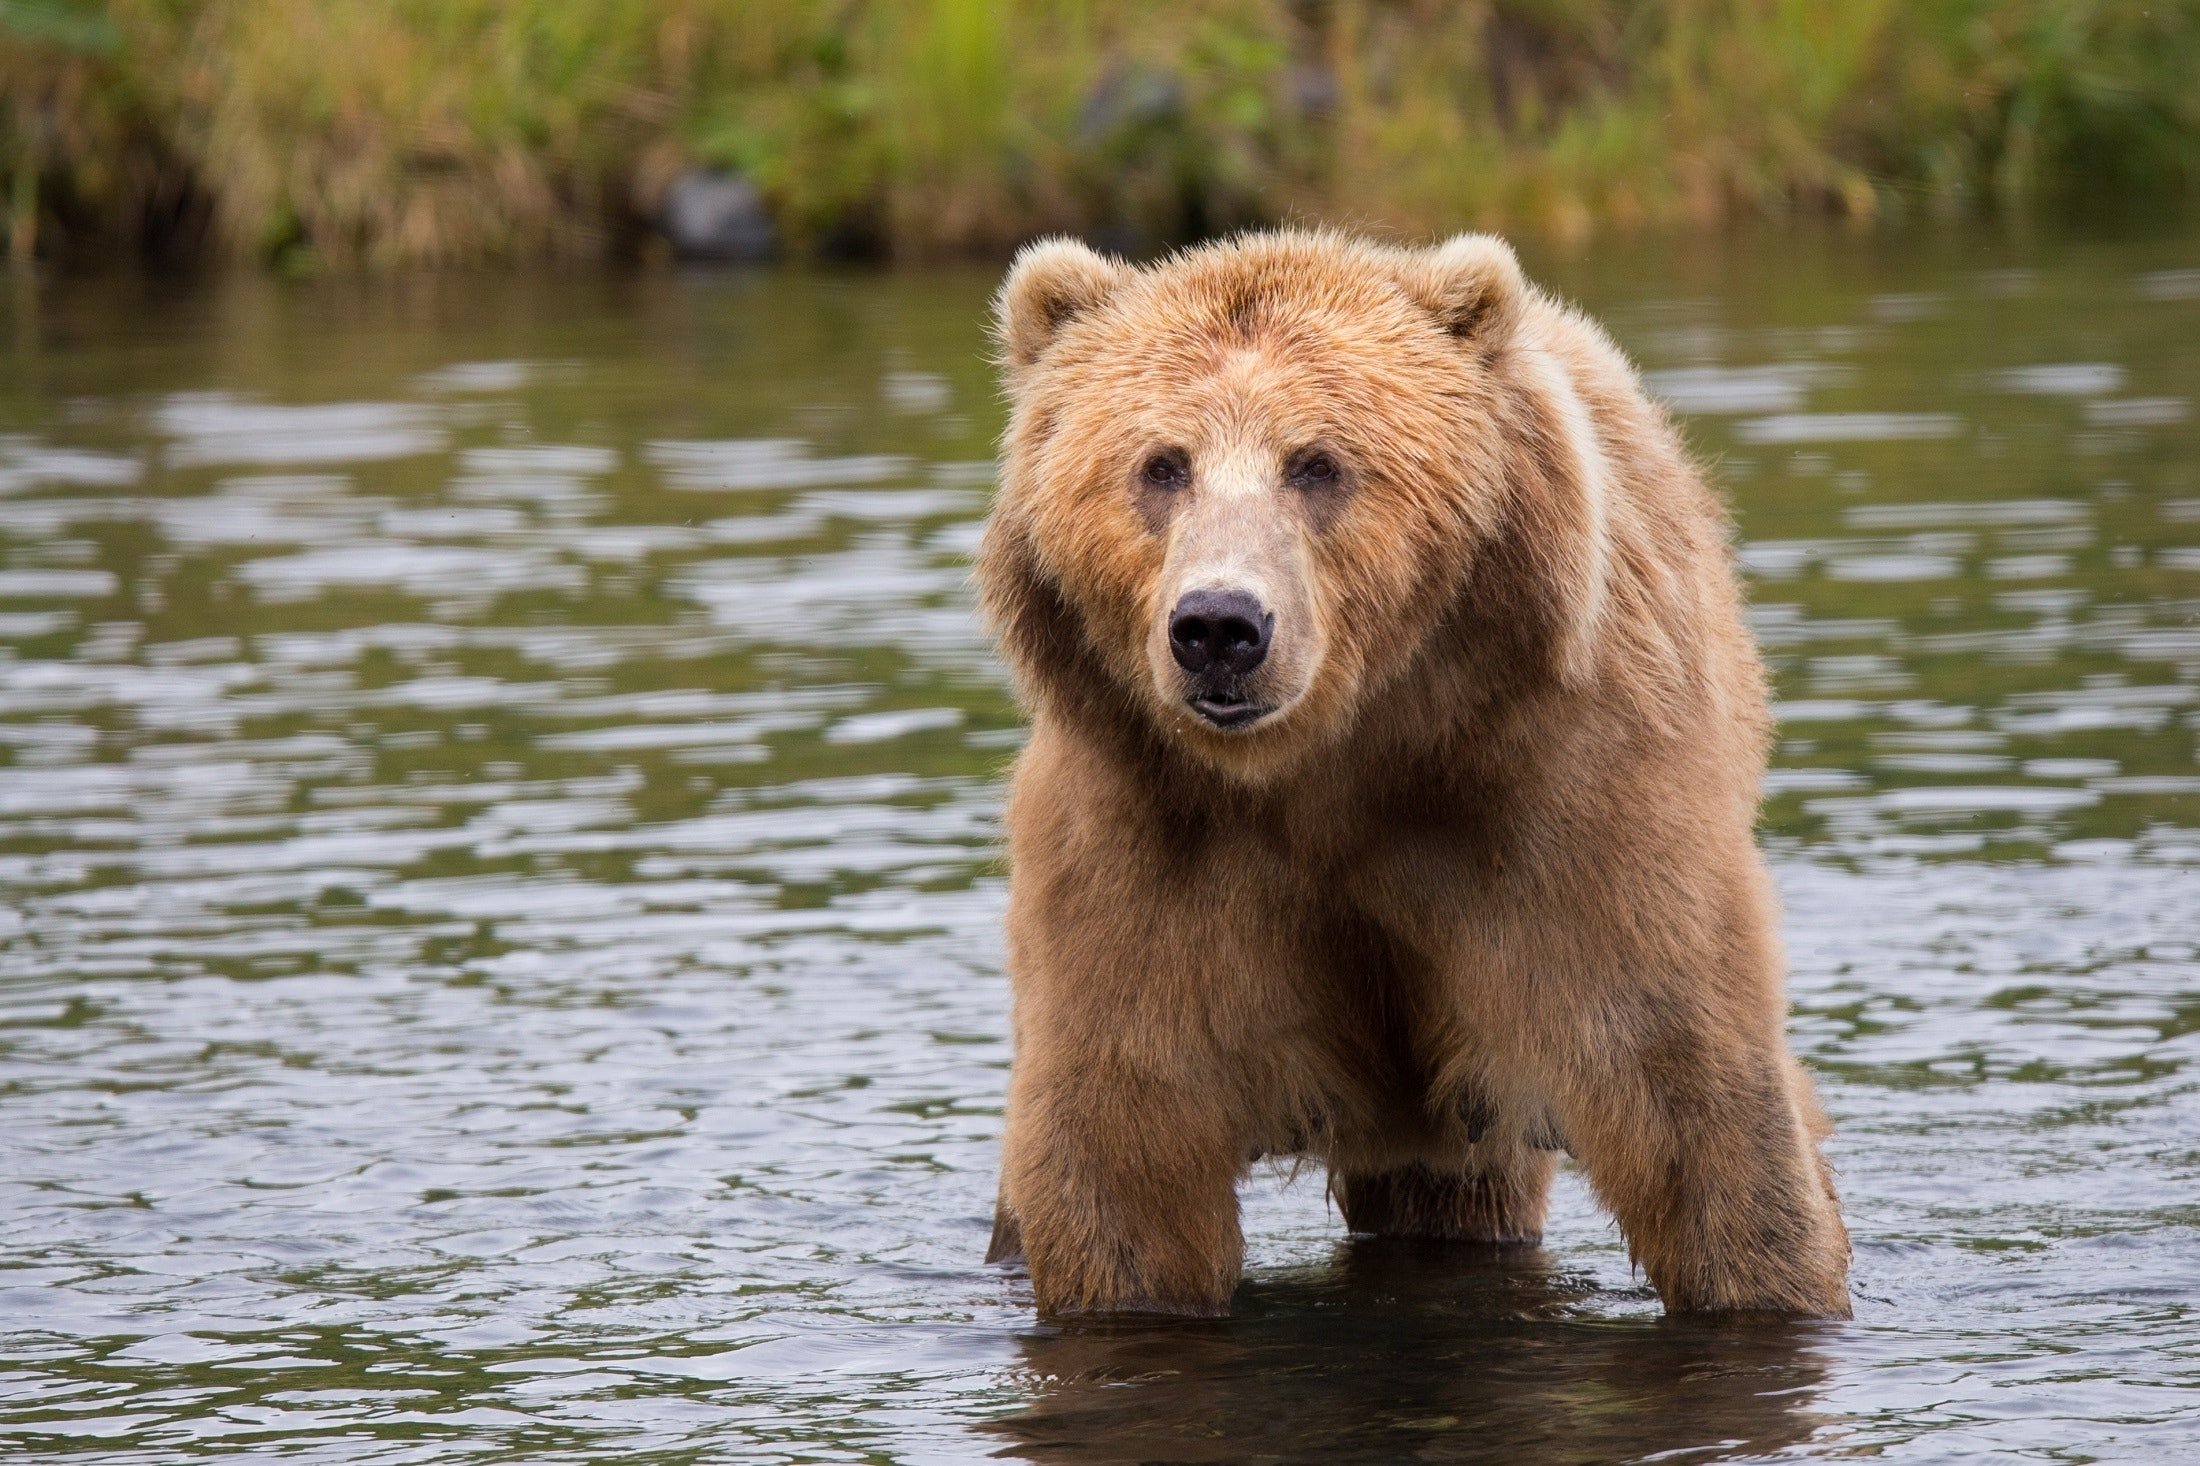 A big brown bear wades through the water next to the river's edge | Photo: Pexels/Pixabay